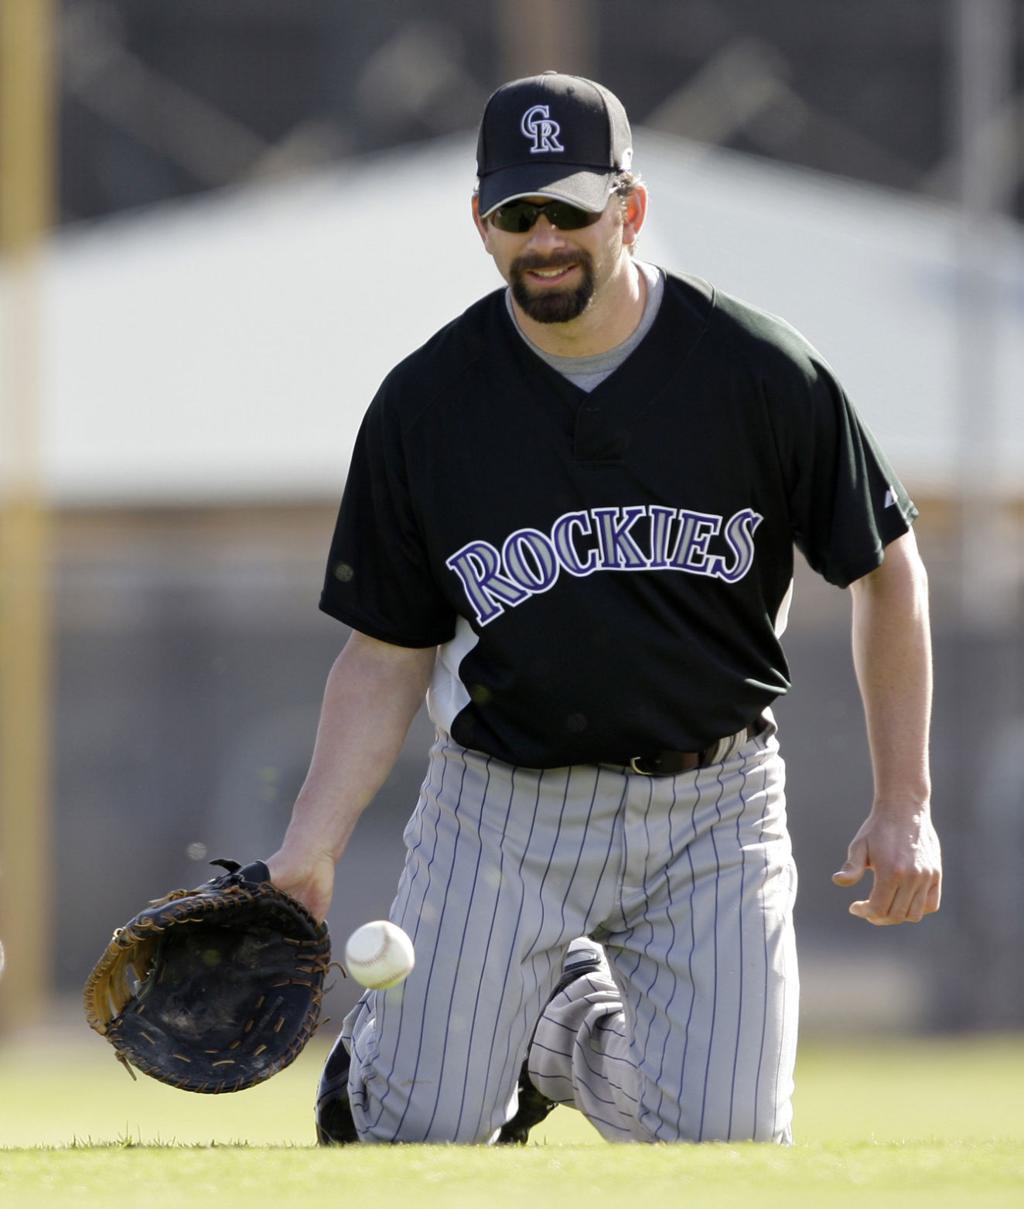 Todd Helton's Residence: A Peek into the Homes of the Former MLB Star -  SarkariResult